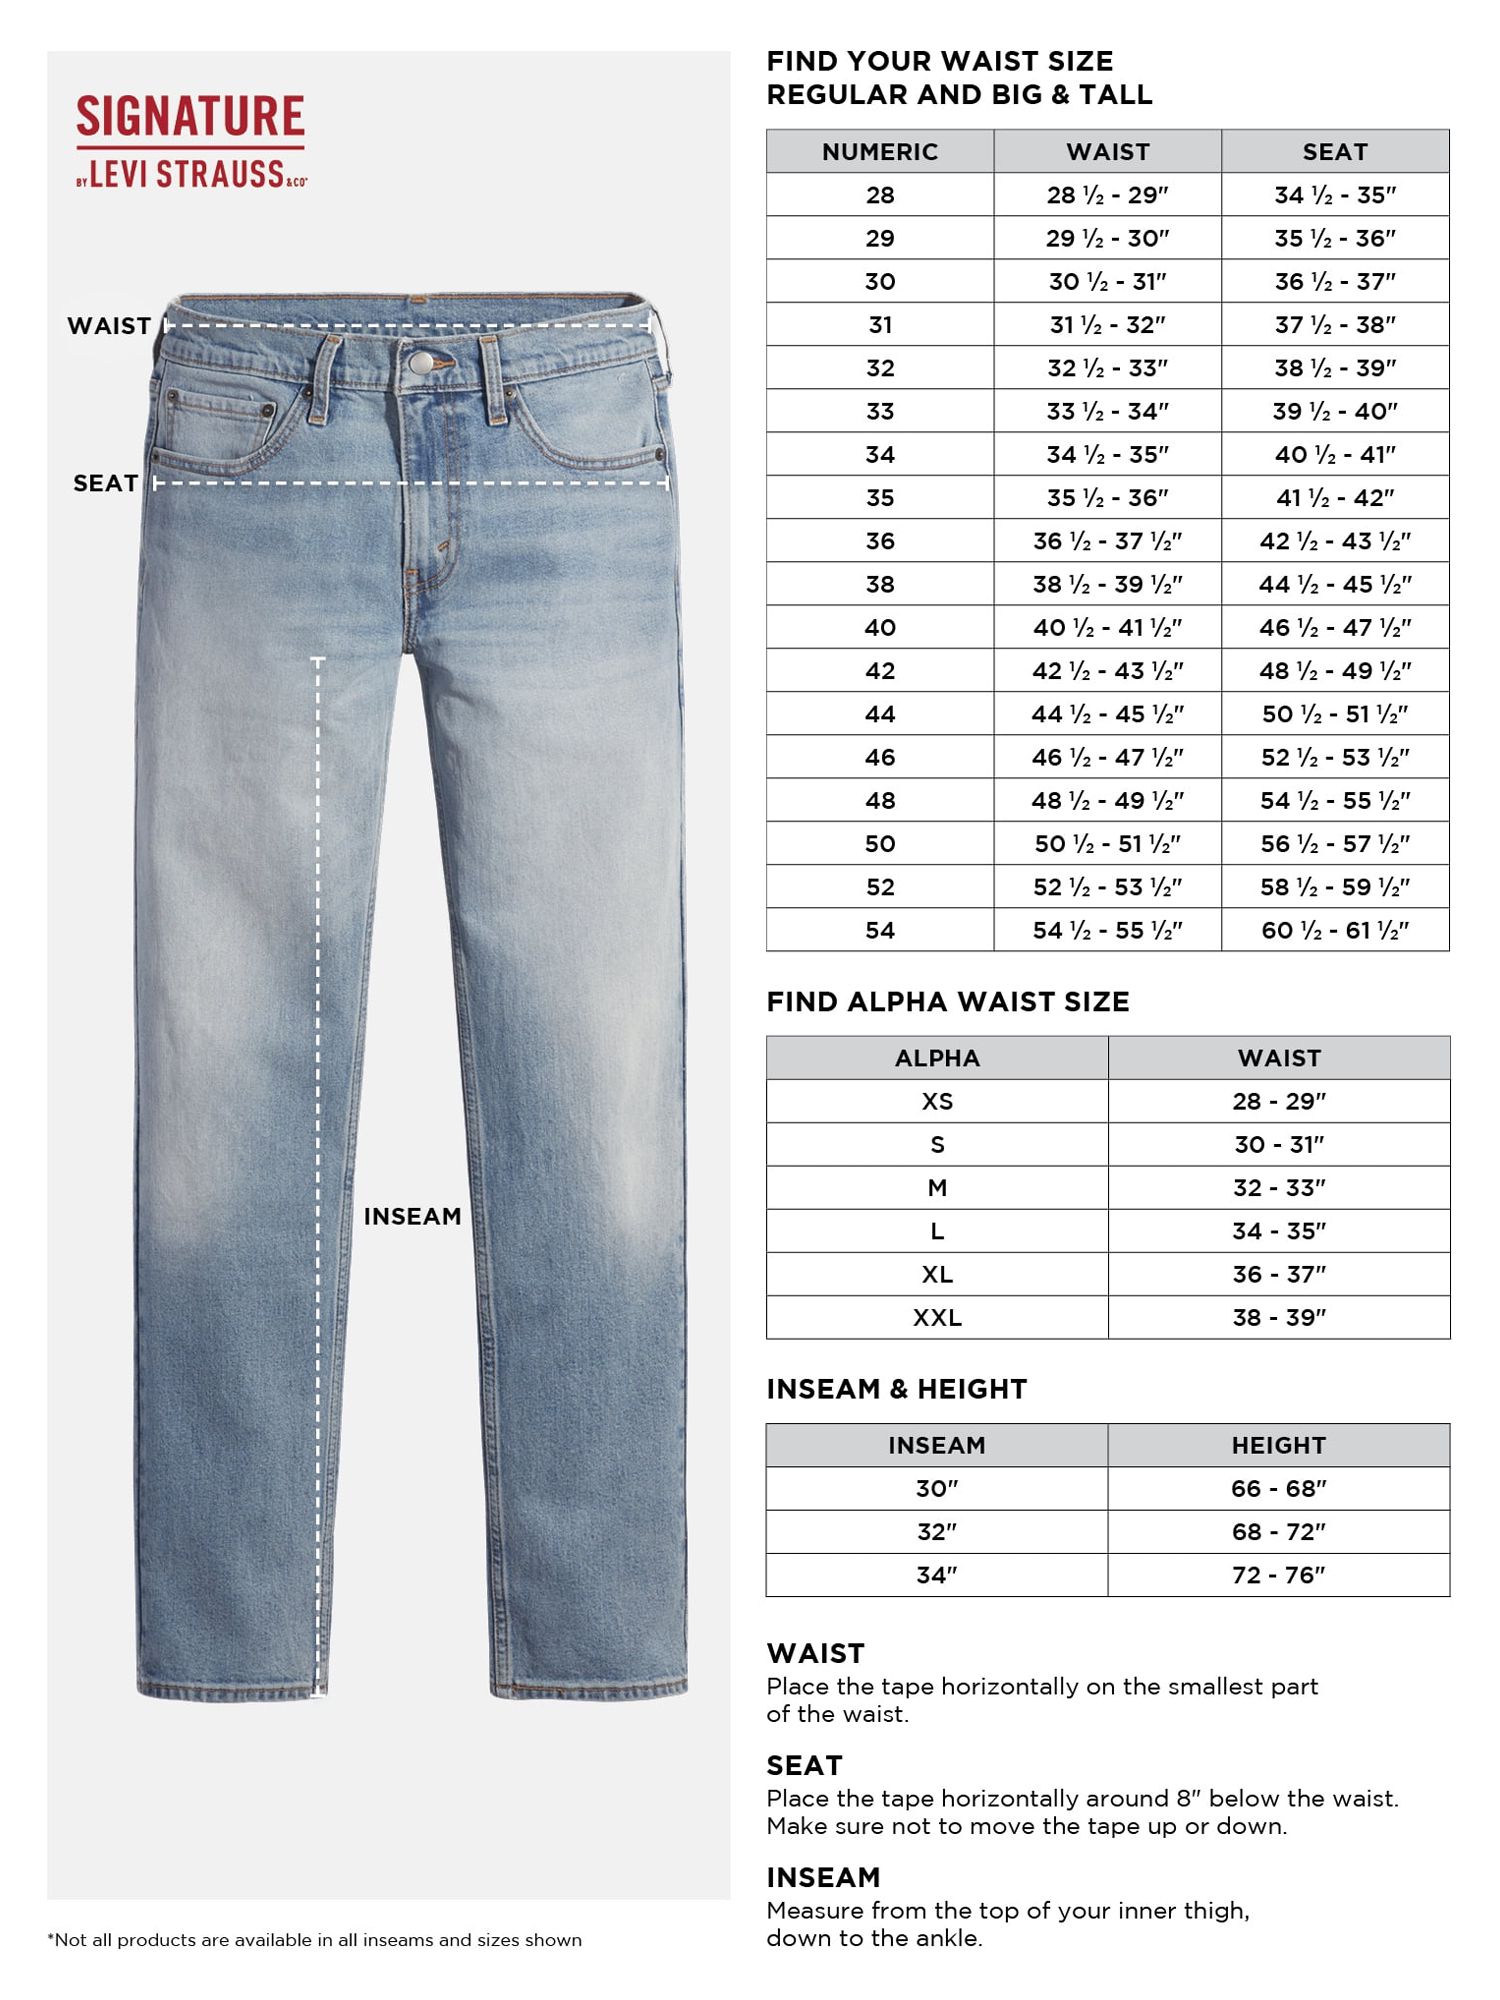 Signature by Levi Strauss & Co. Men’s and Big and Tall Slim Fit Jeans - image 4 of 5